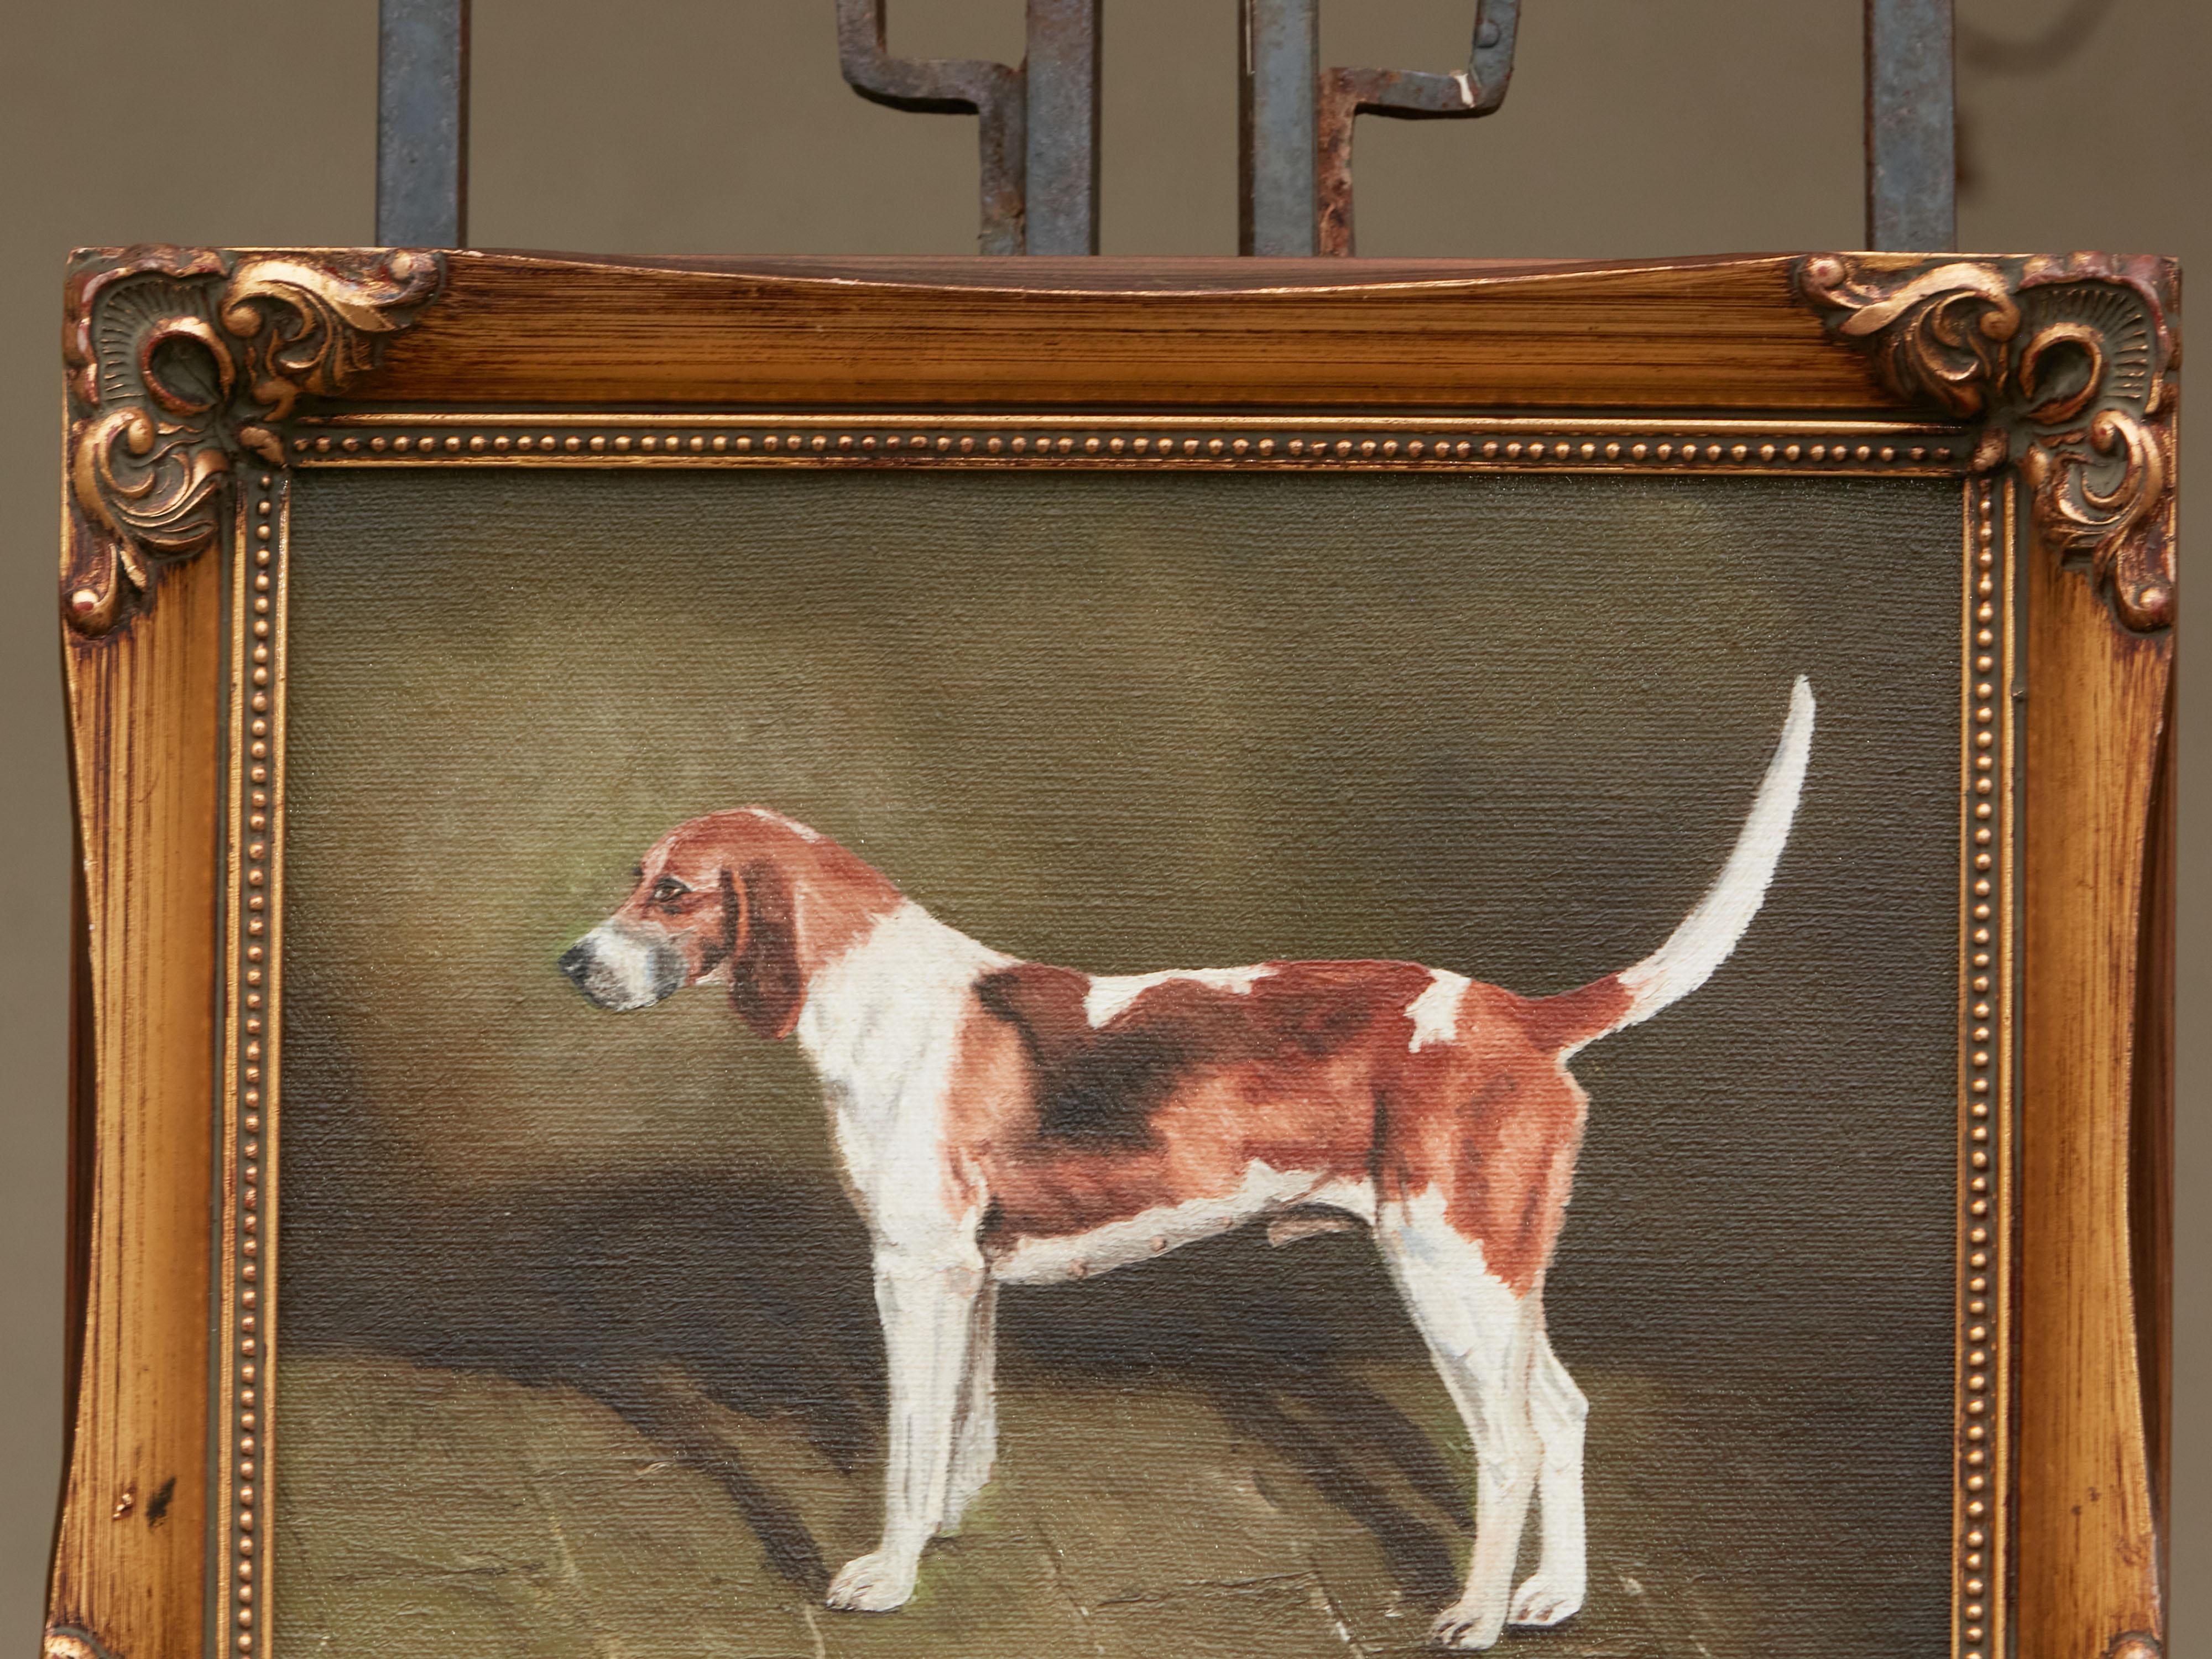 Oil on Canvas Dog Painting Depicting a Belvoir Hound, Signed Jacqueline Decker 5